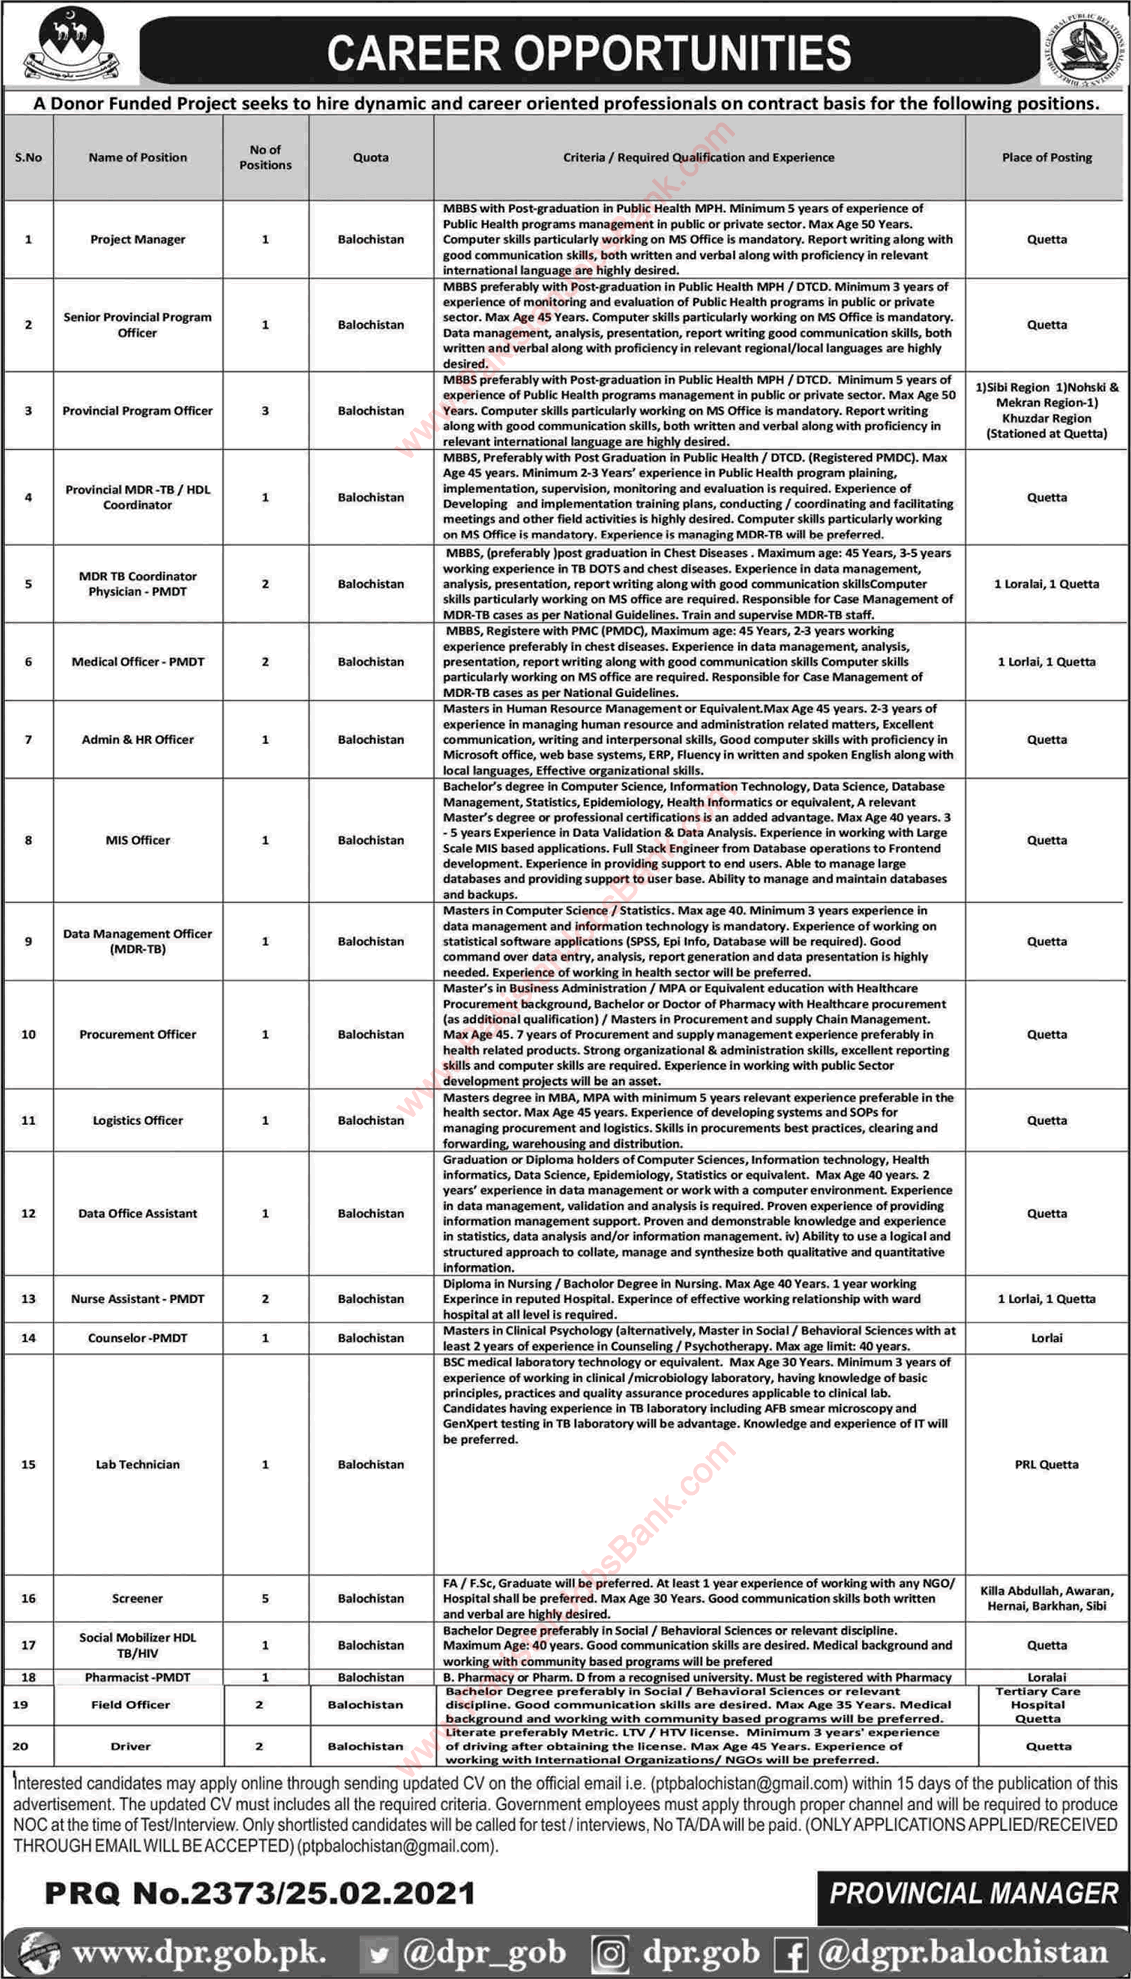 Provincial TB Control Program Balochistan Jobs 2021 February / March Program Officers, Screeners & Others Latest